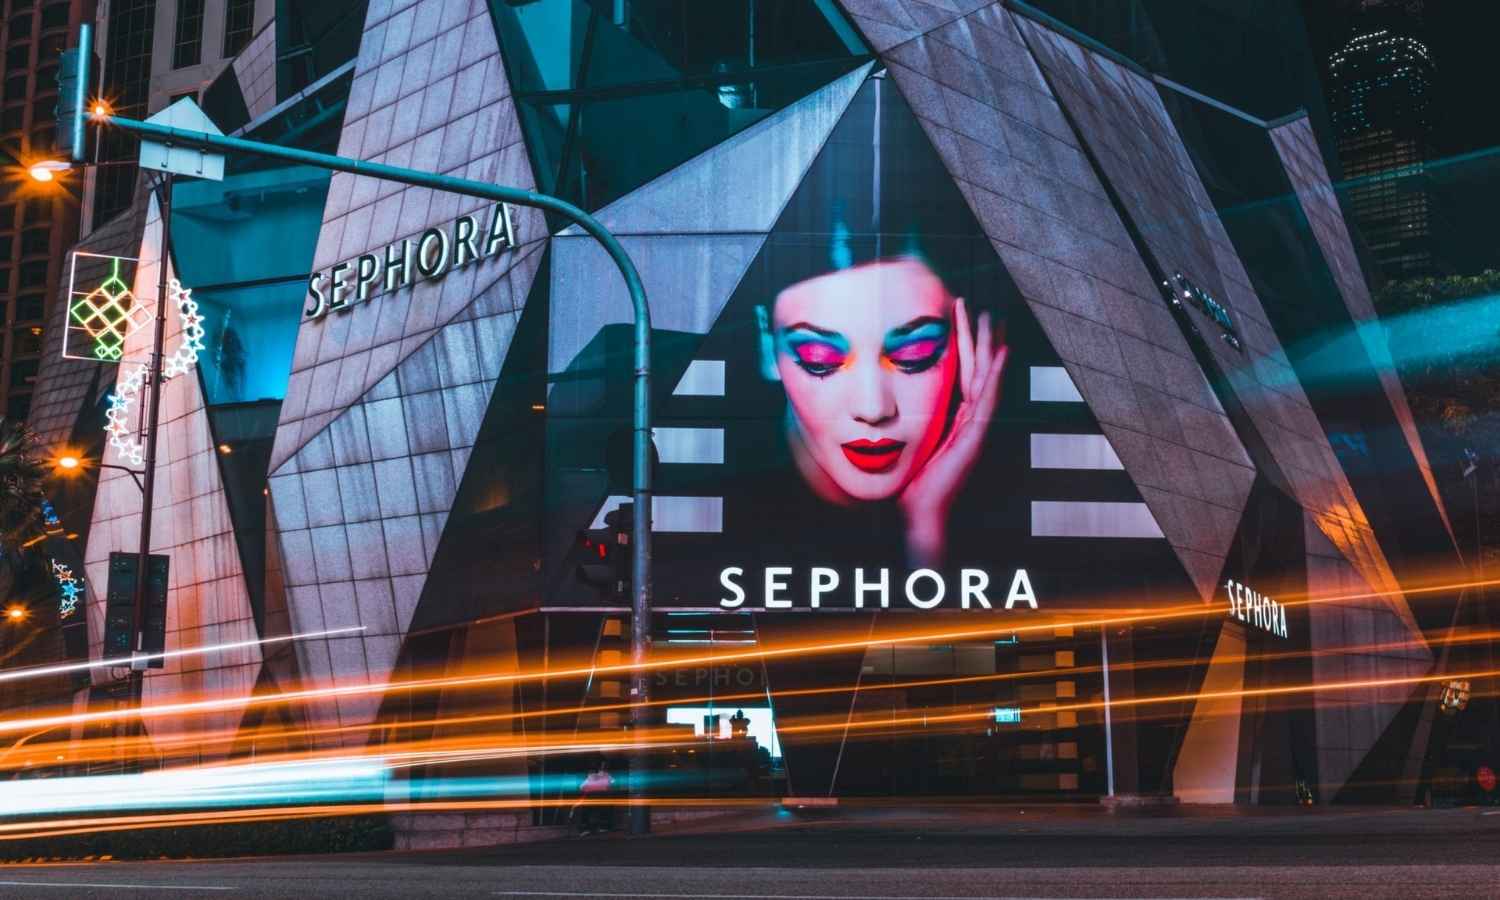 Sephora Return Policy 101 (Tips + More)